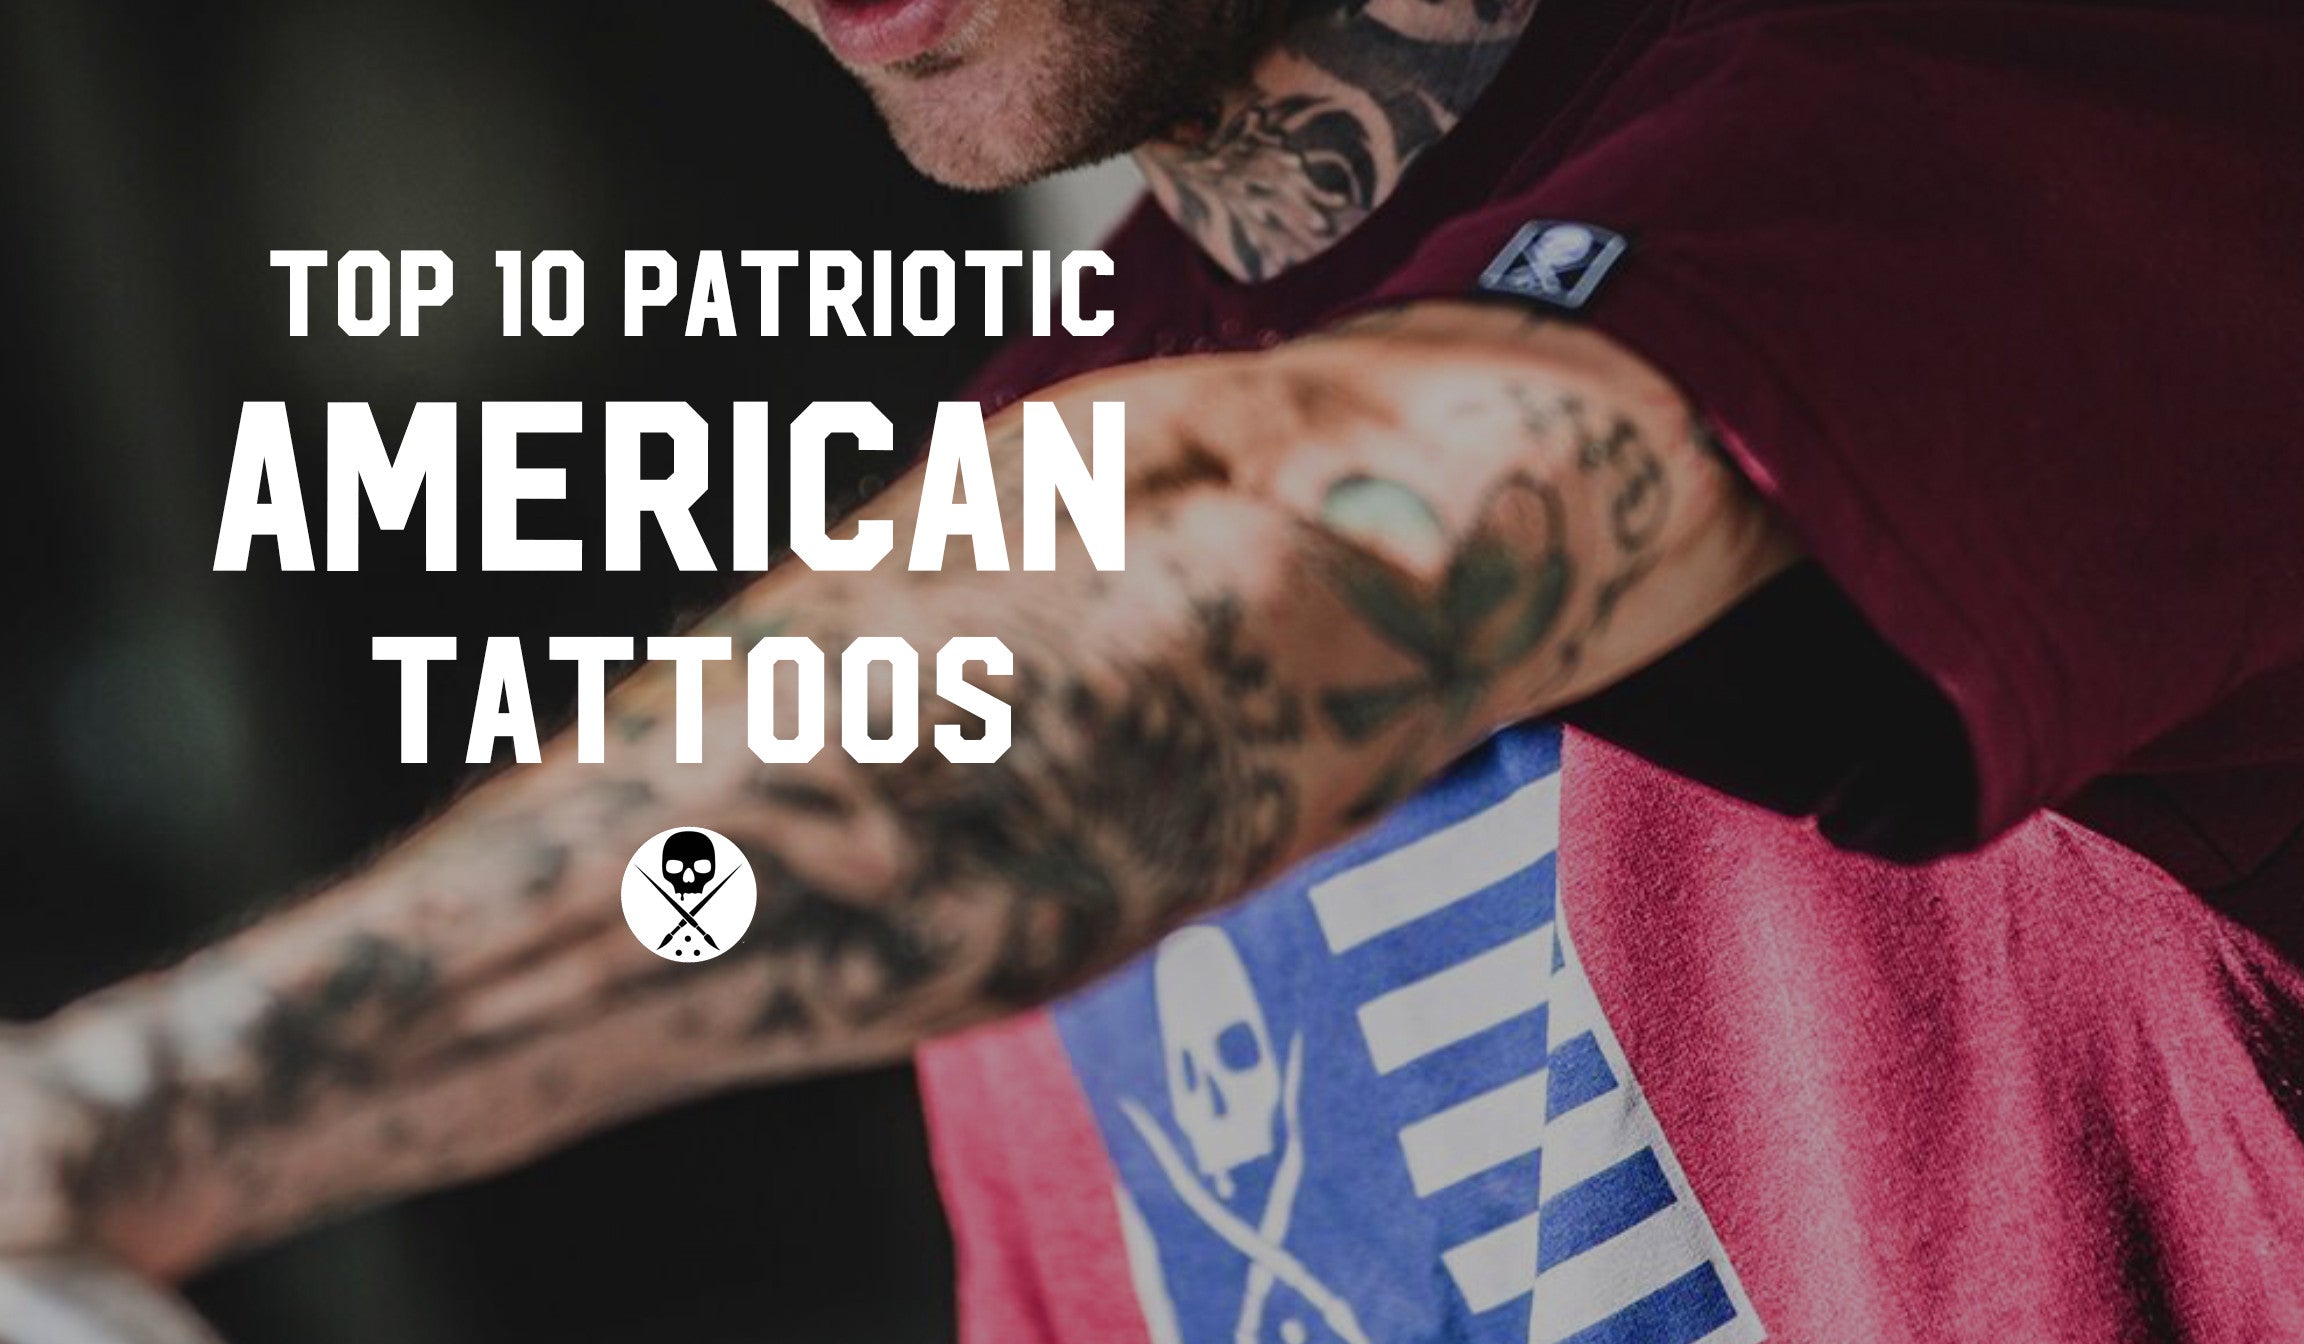 American Soldier Patriotic Tattoos Sleeve Full Arm Temporary Tattoo For Men  Women Adult Fake Pride Independence